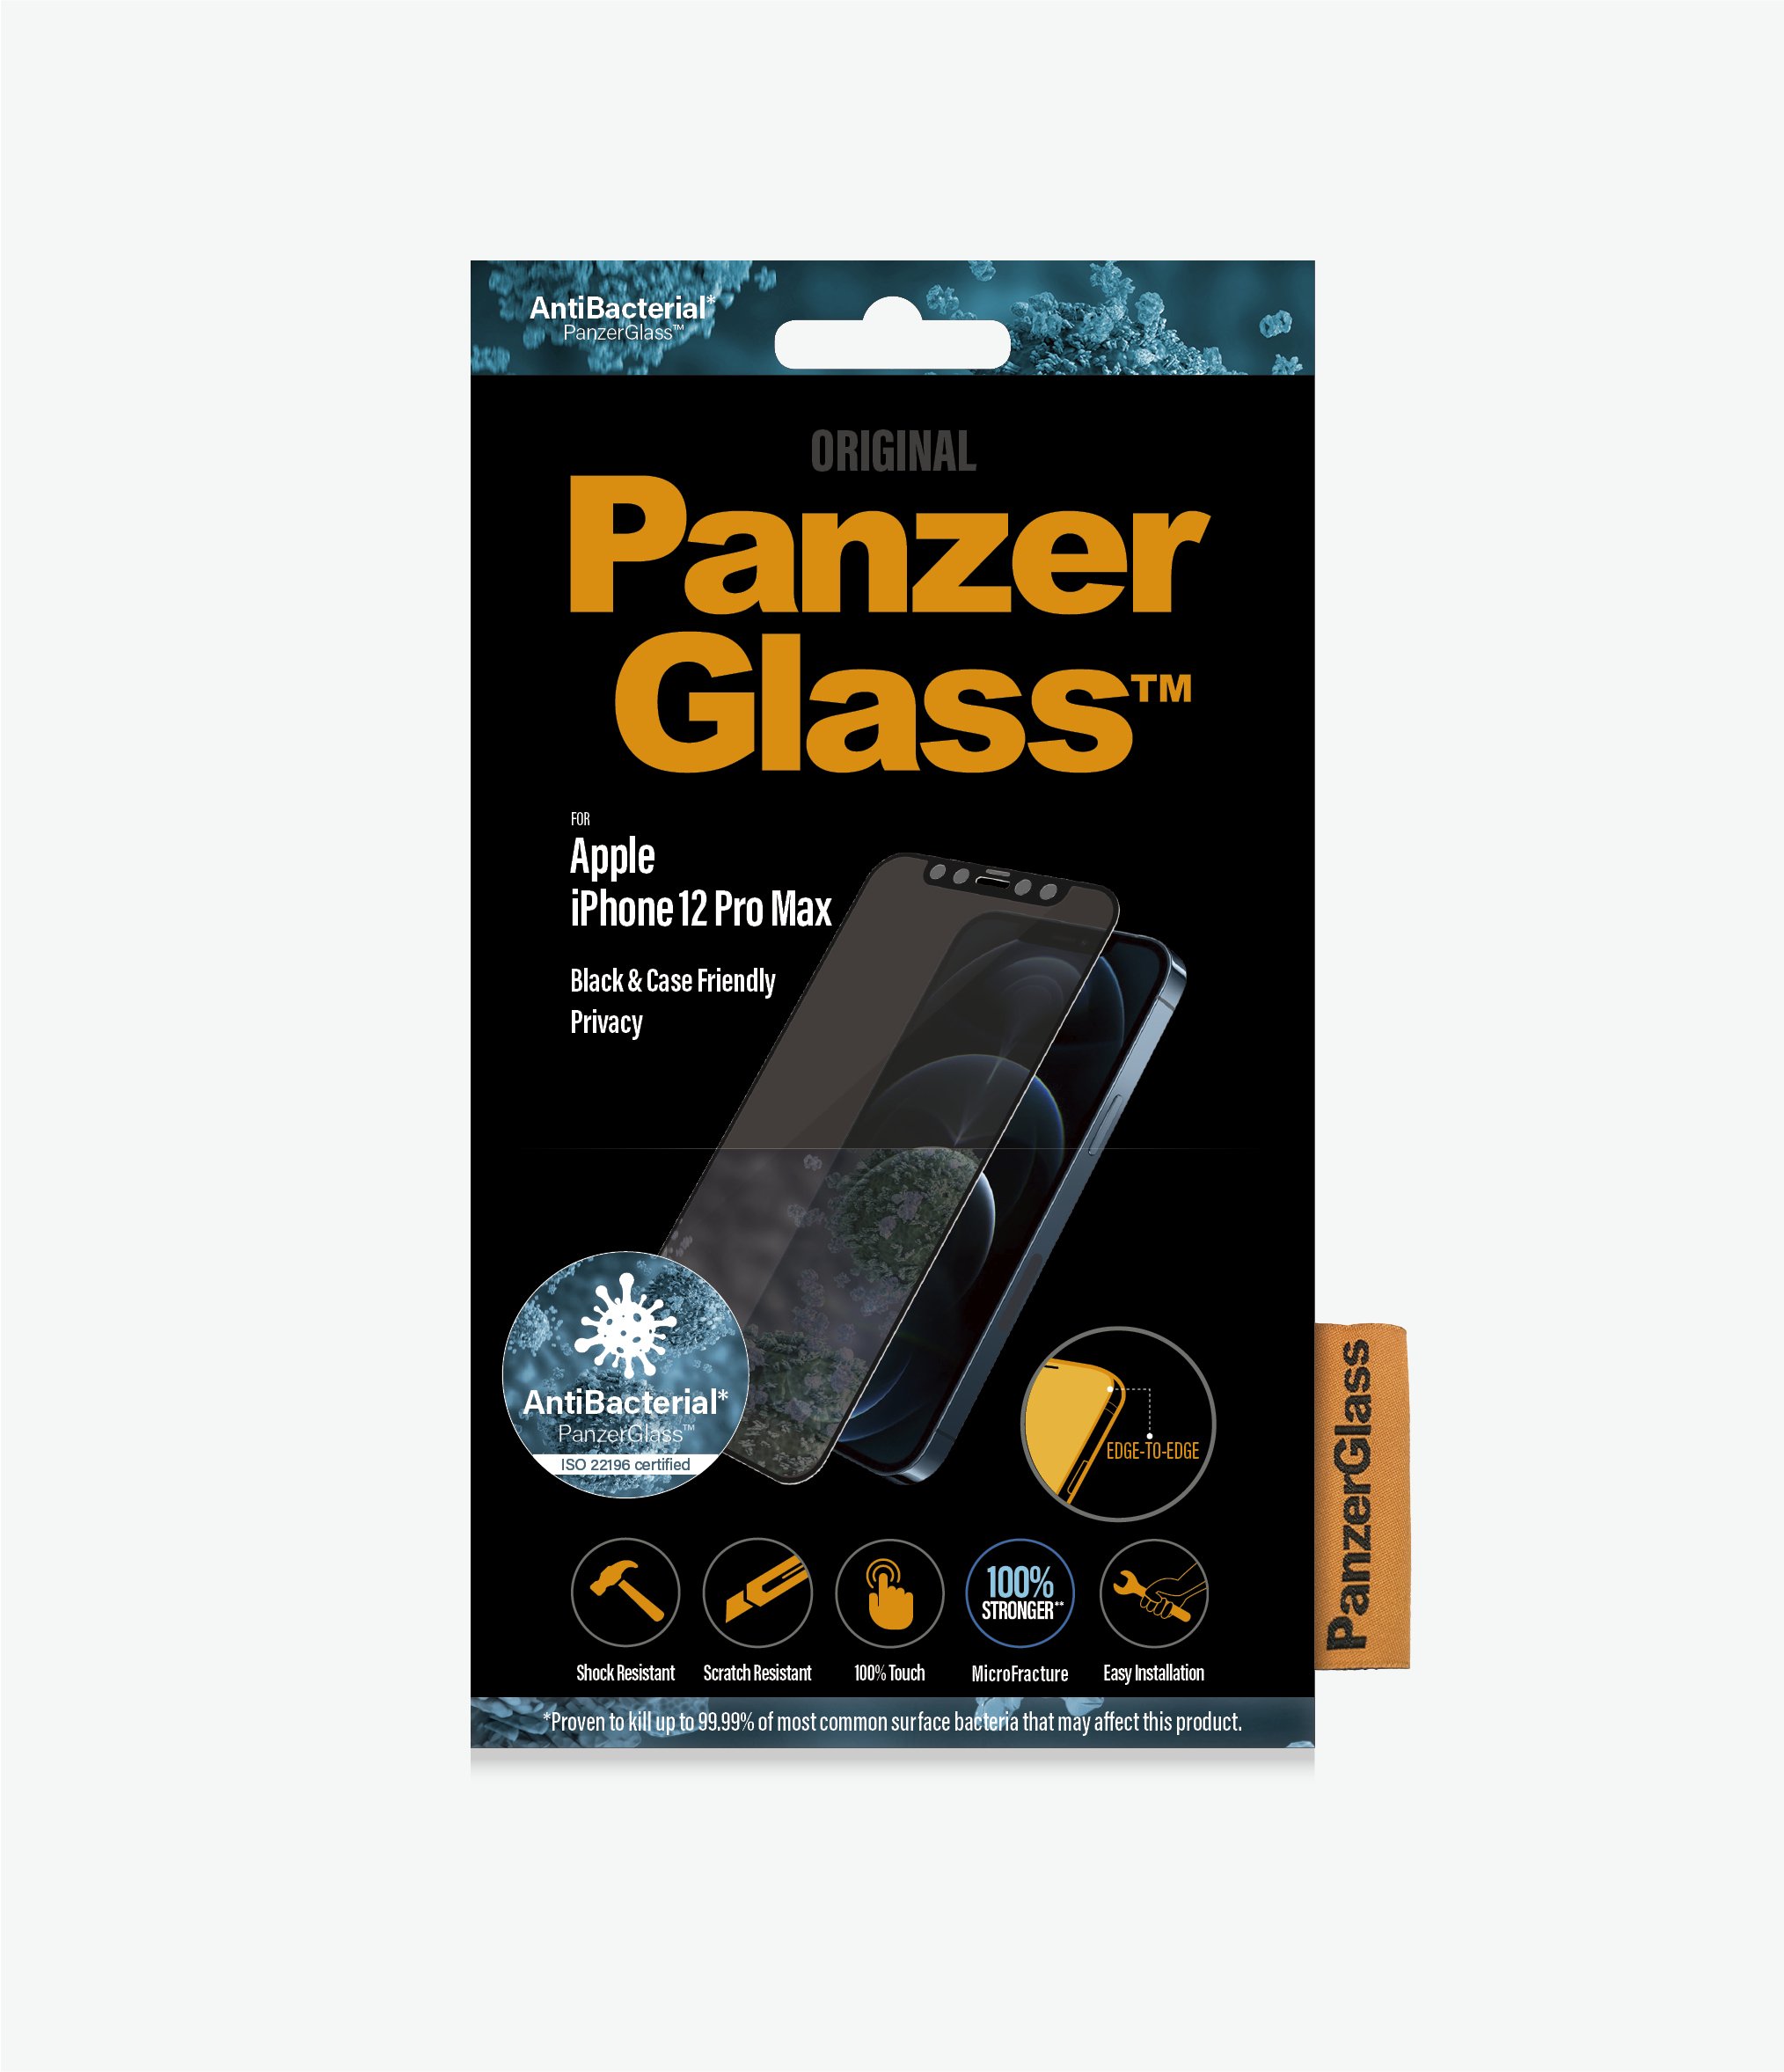 PanzerGlass™ Apple iPhone 12 Pro Max - Black (P2712) - Privacy - Screen Protector - Resistant to scratches and bacteria, Shock absorbing, 100% touch